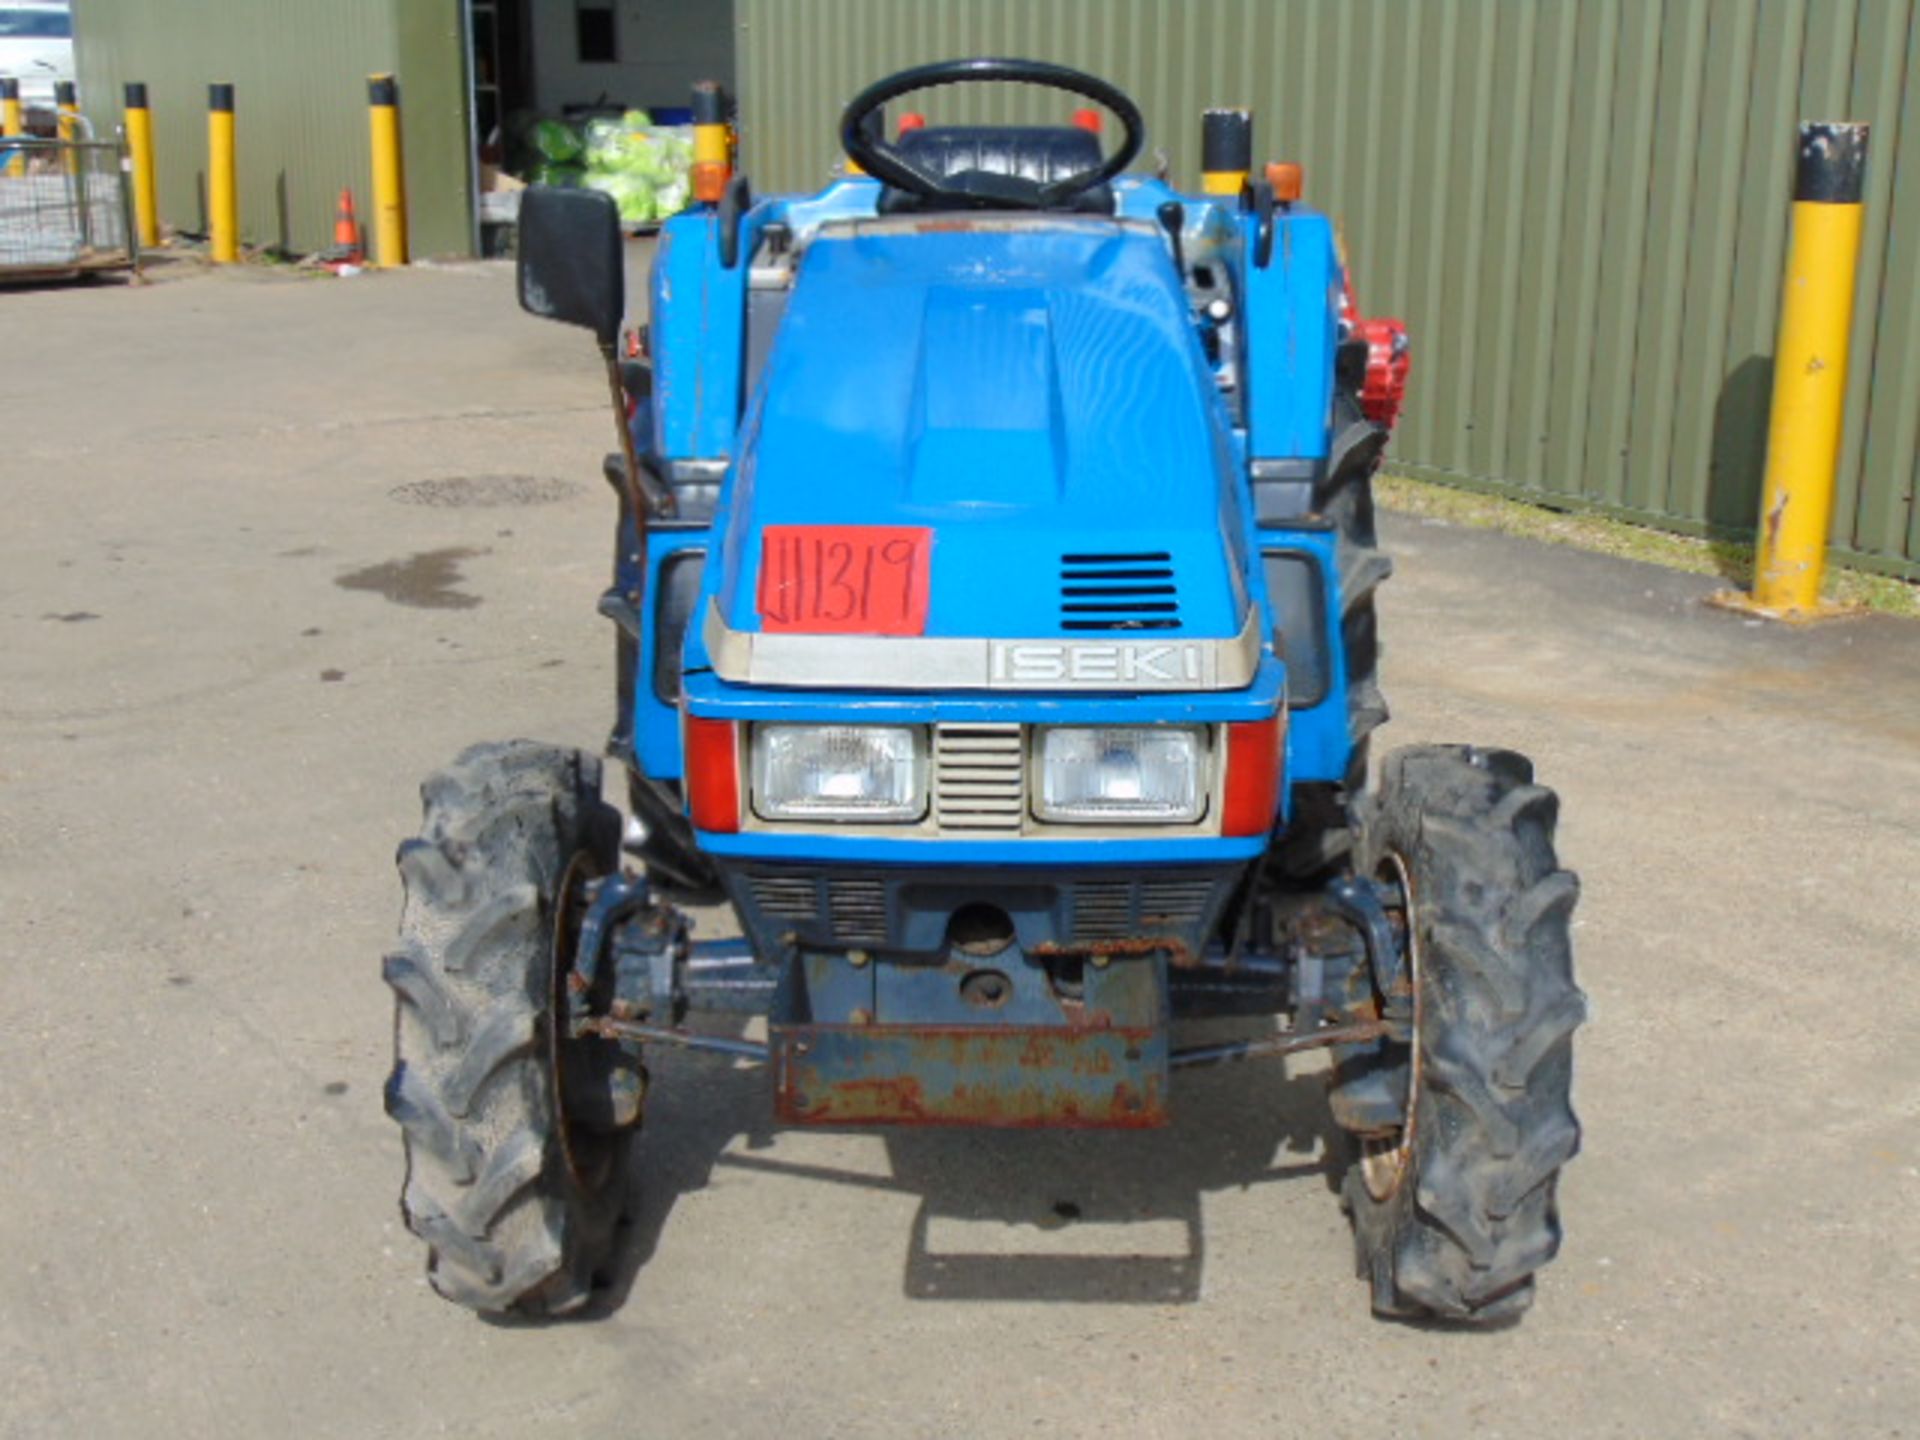 Iseki Landhope 205 4x4 Compact Tractor c/w Rotavator ONLY 724 HOURS! - Image 2 of 19